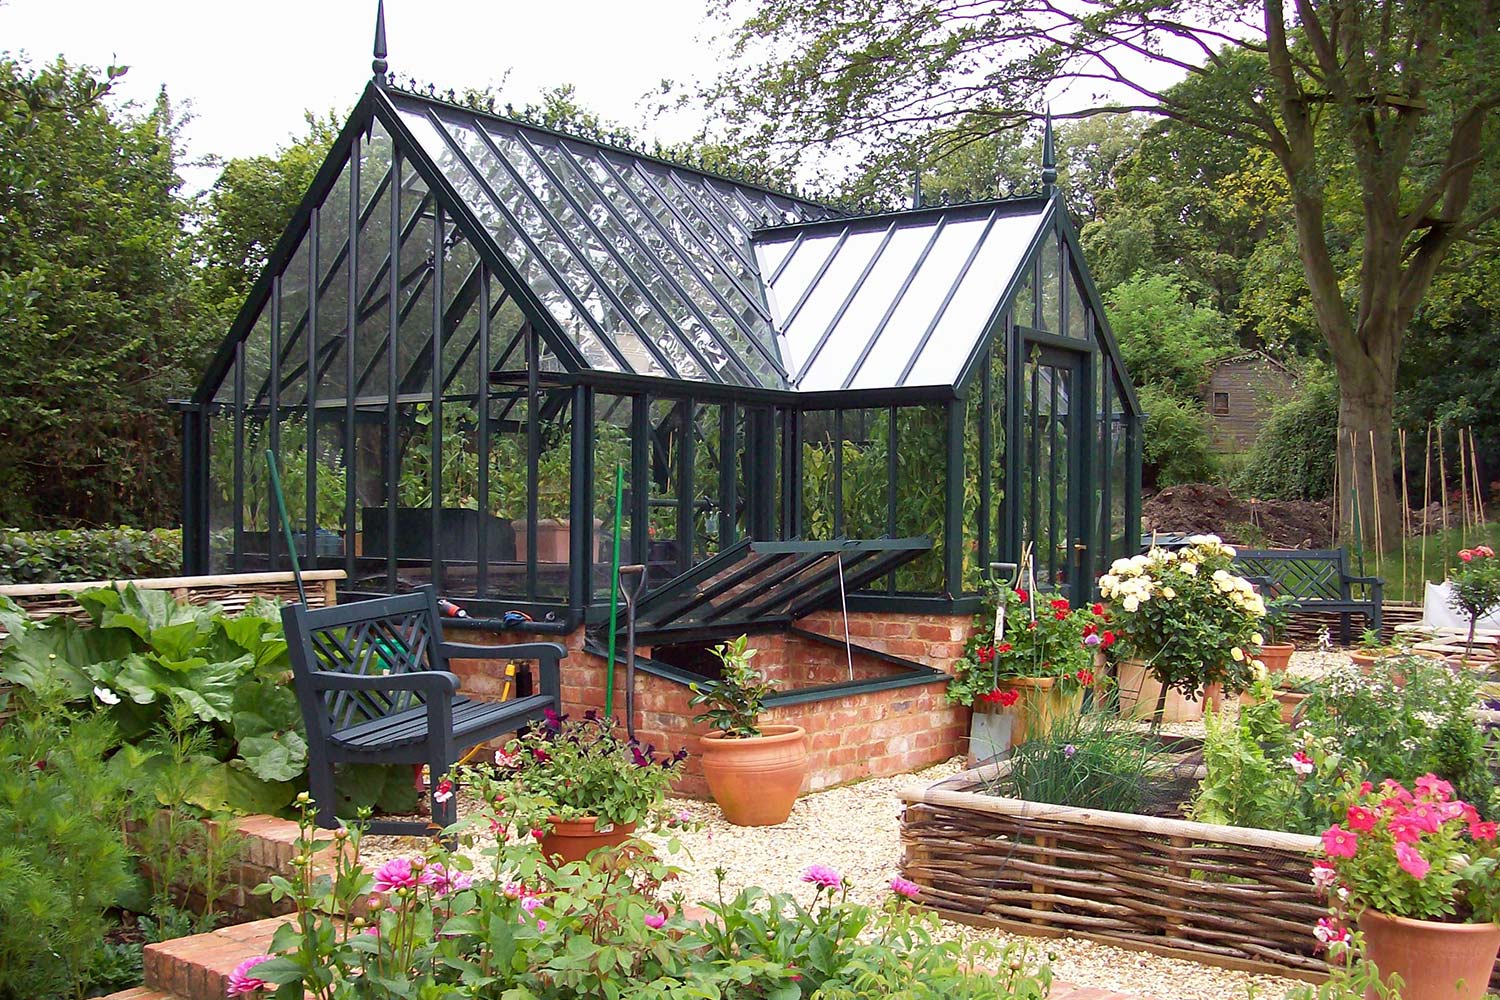 The Fortrey Greenhouse from the Alitex Kew Greenhouse Collection